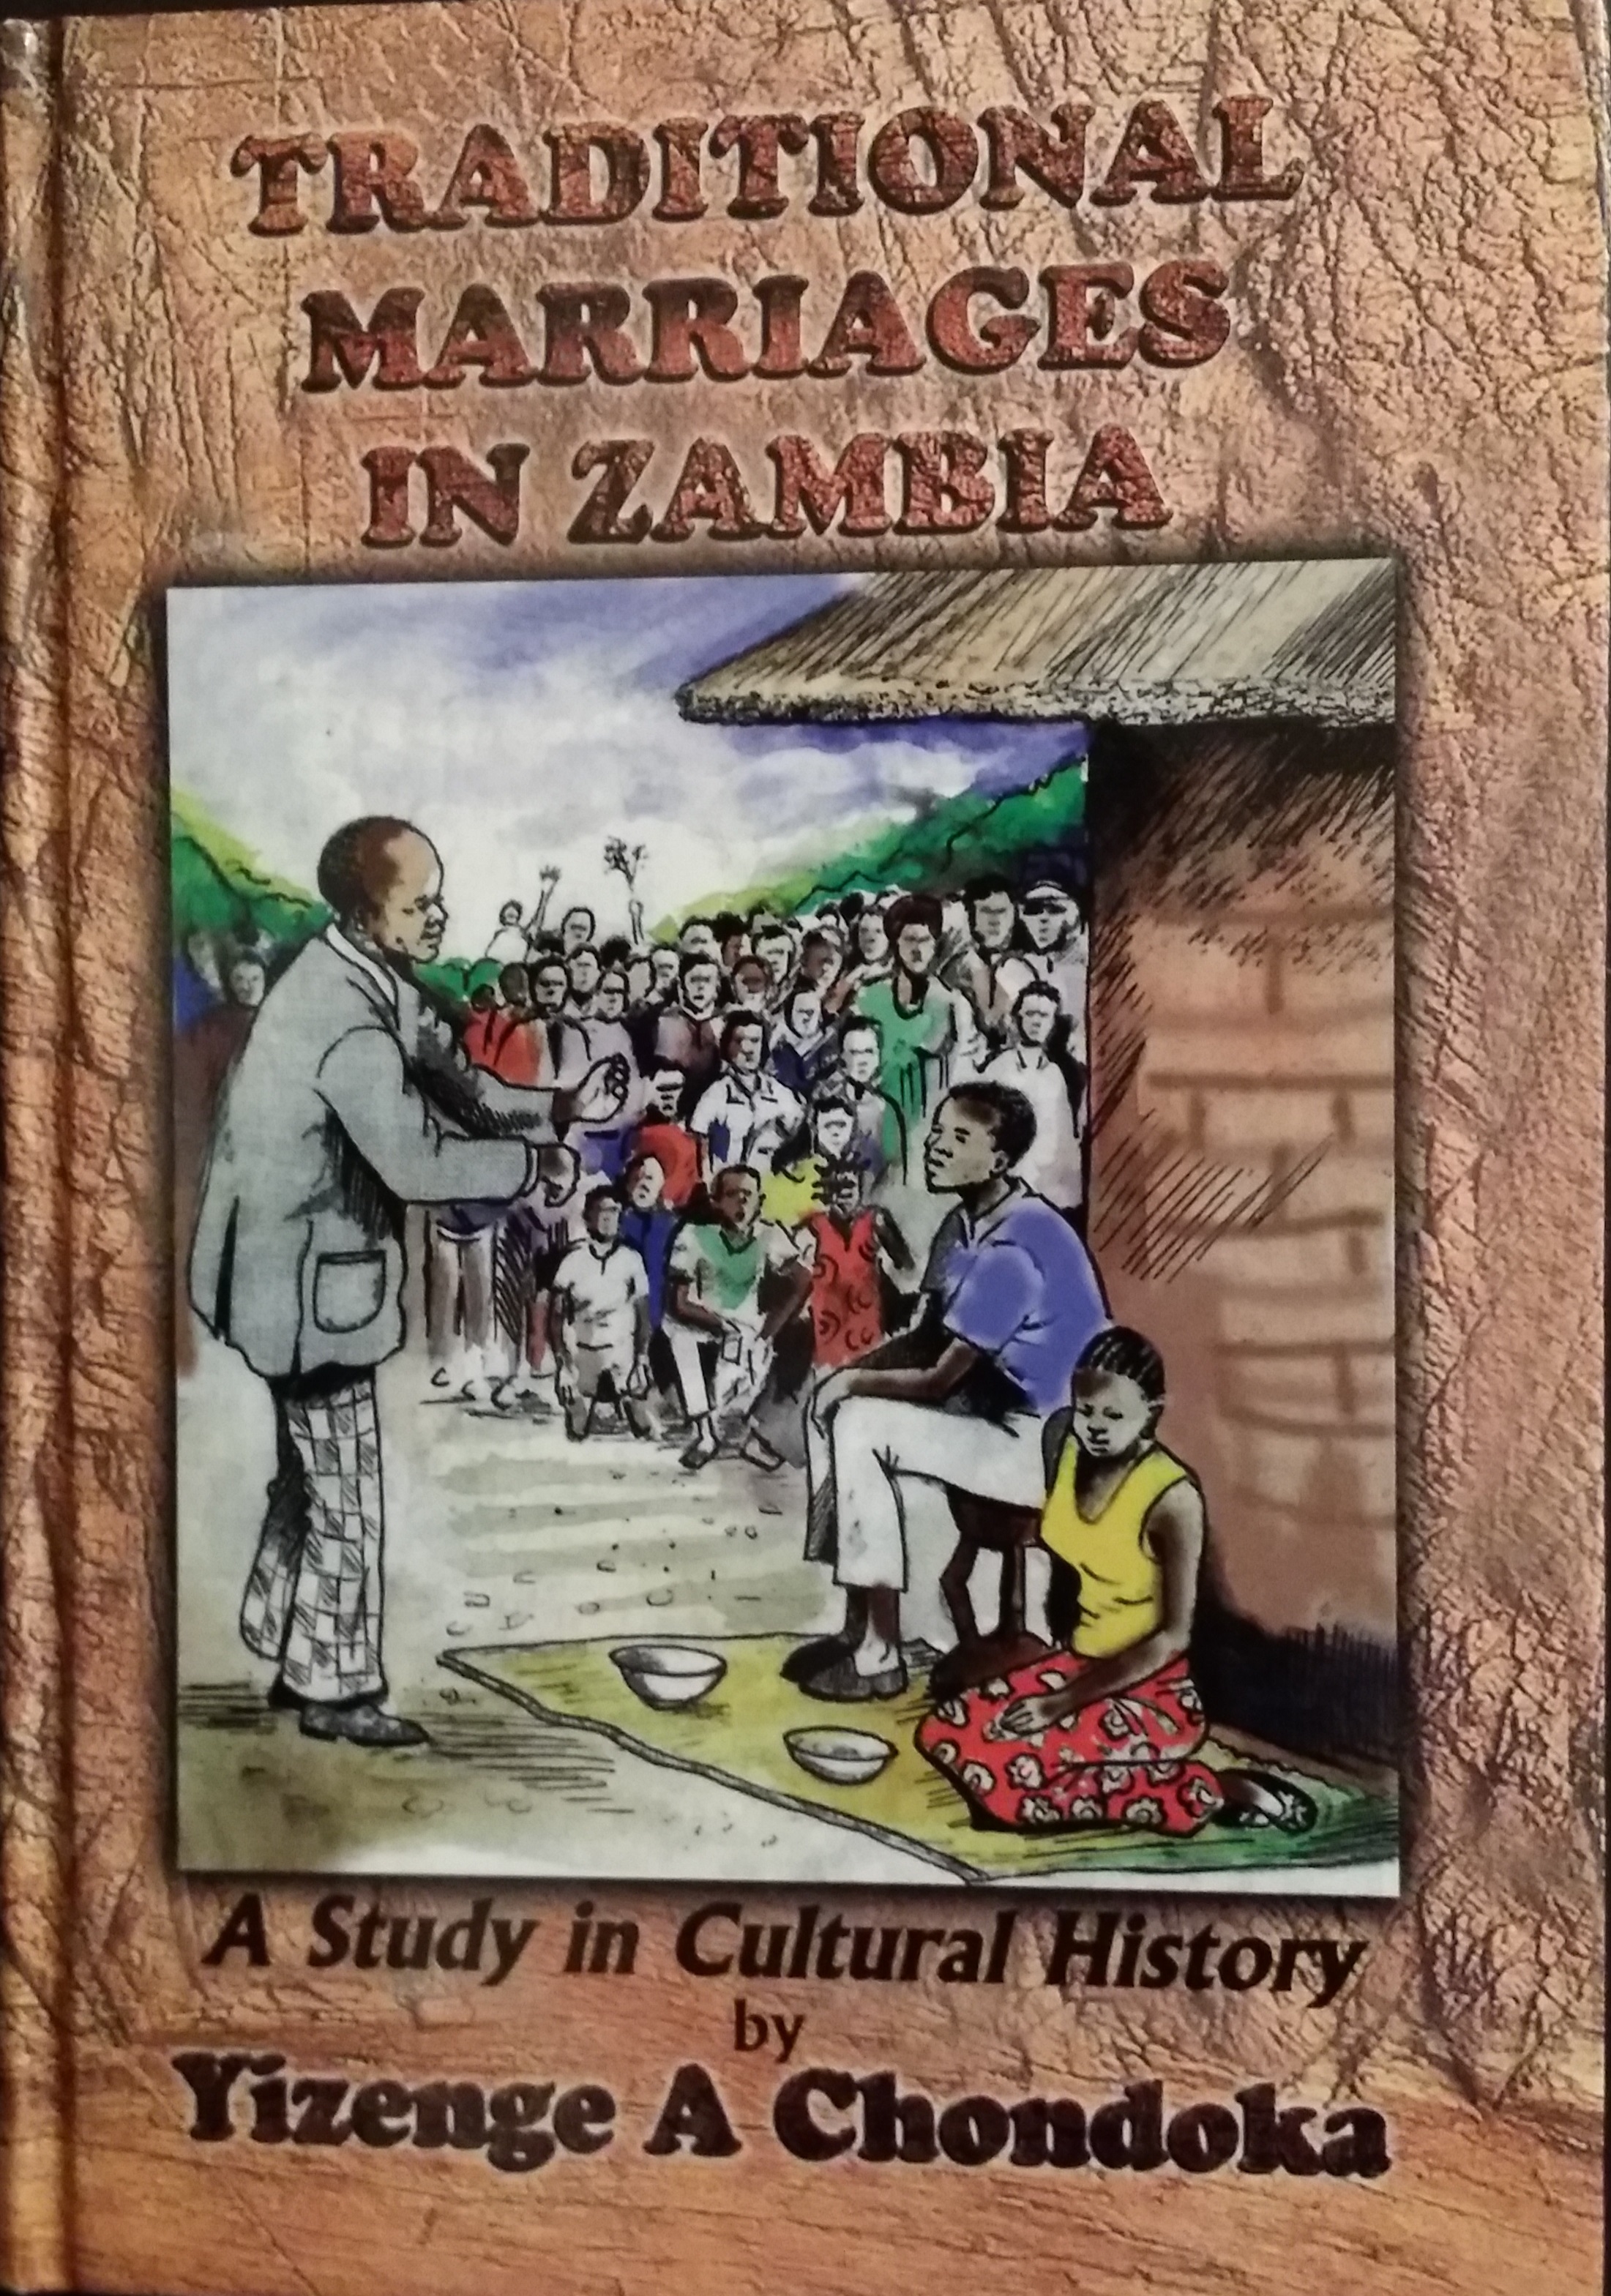 write an essay about early marriages in zambia